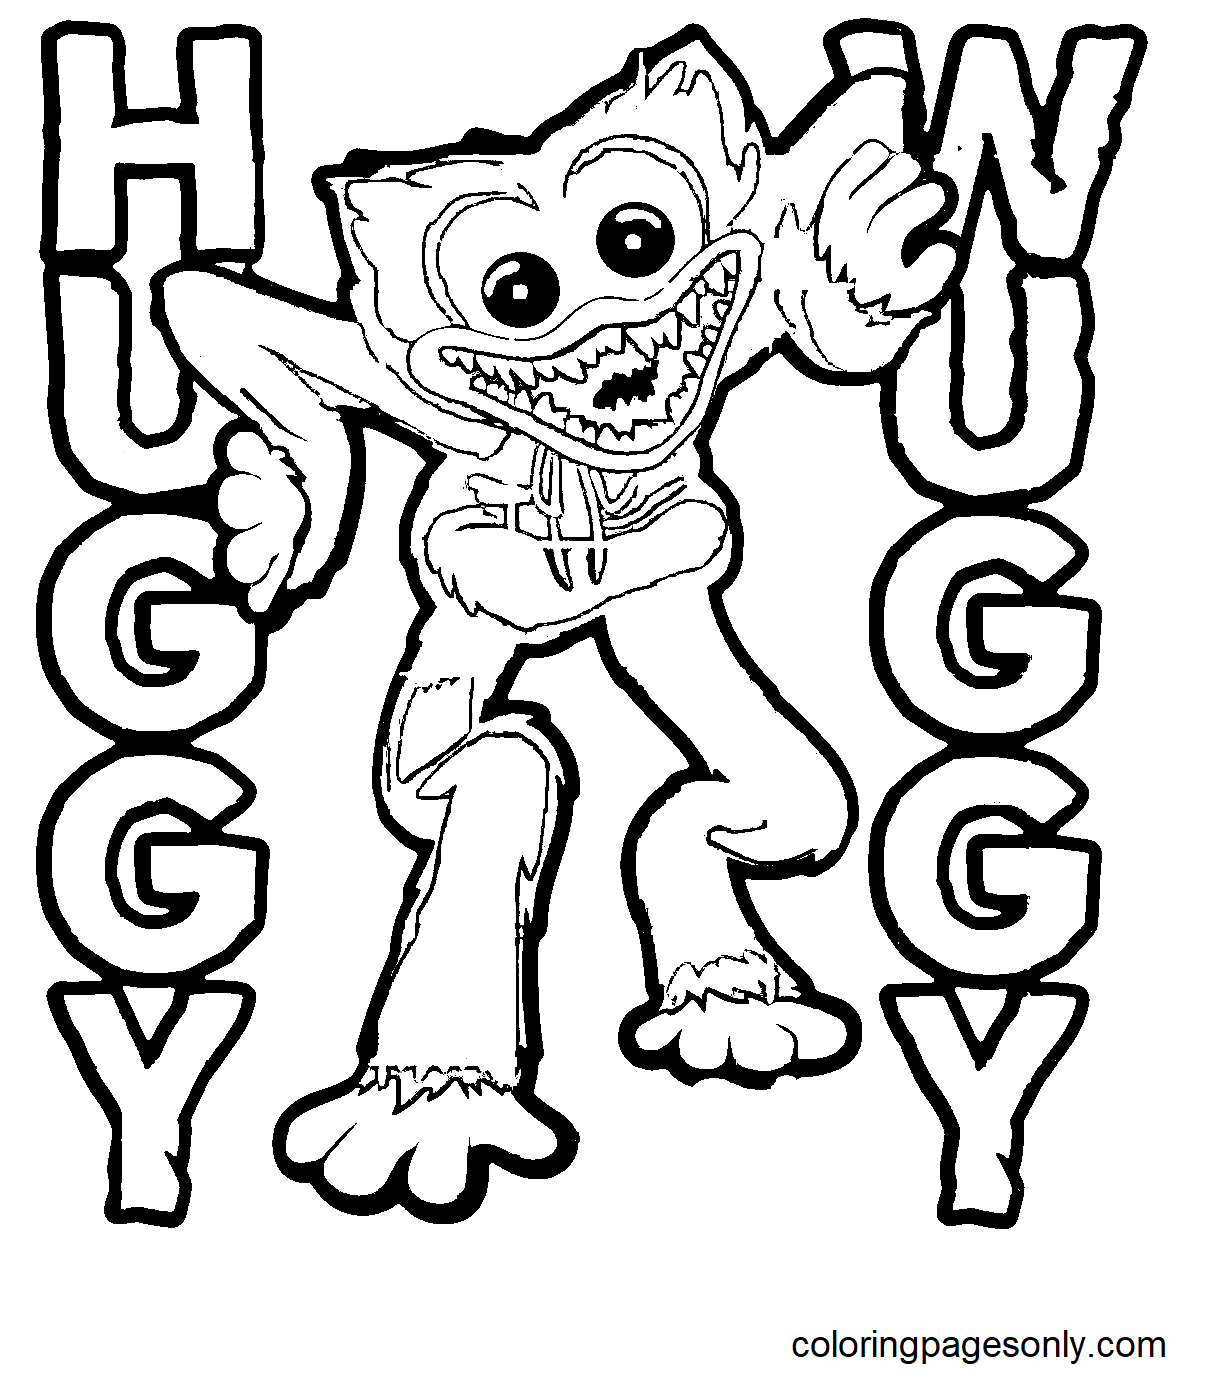 Huggy Wuggy Coloring Pages - Huggy Wuggy Coloring Pages - Coloring Pages  For Kids And Adults